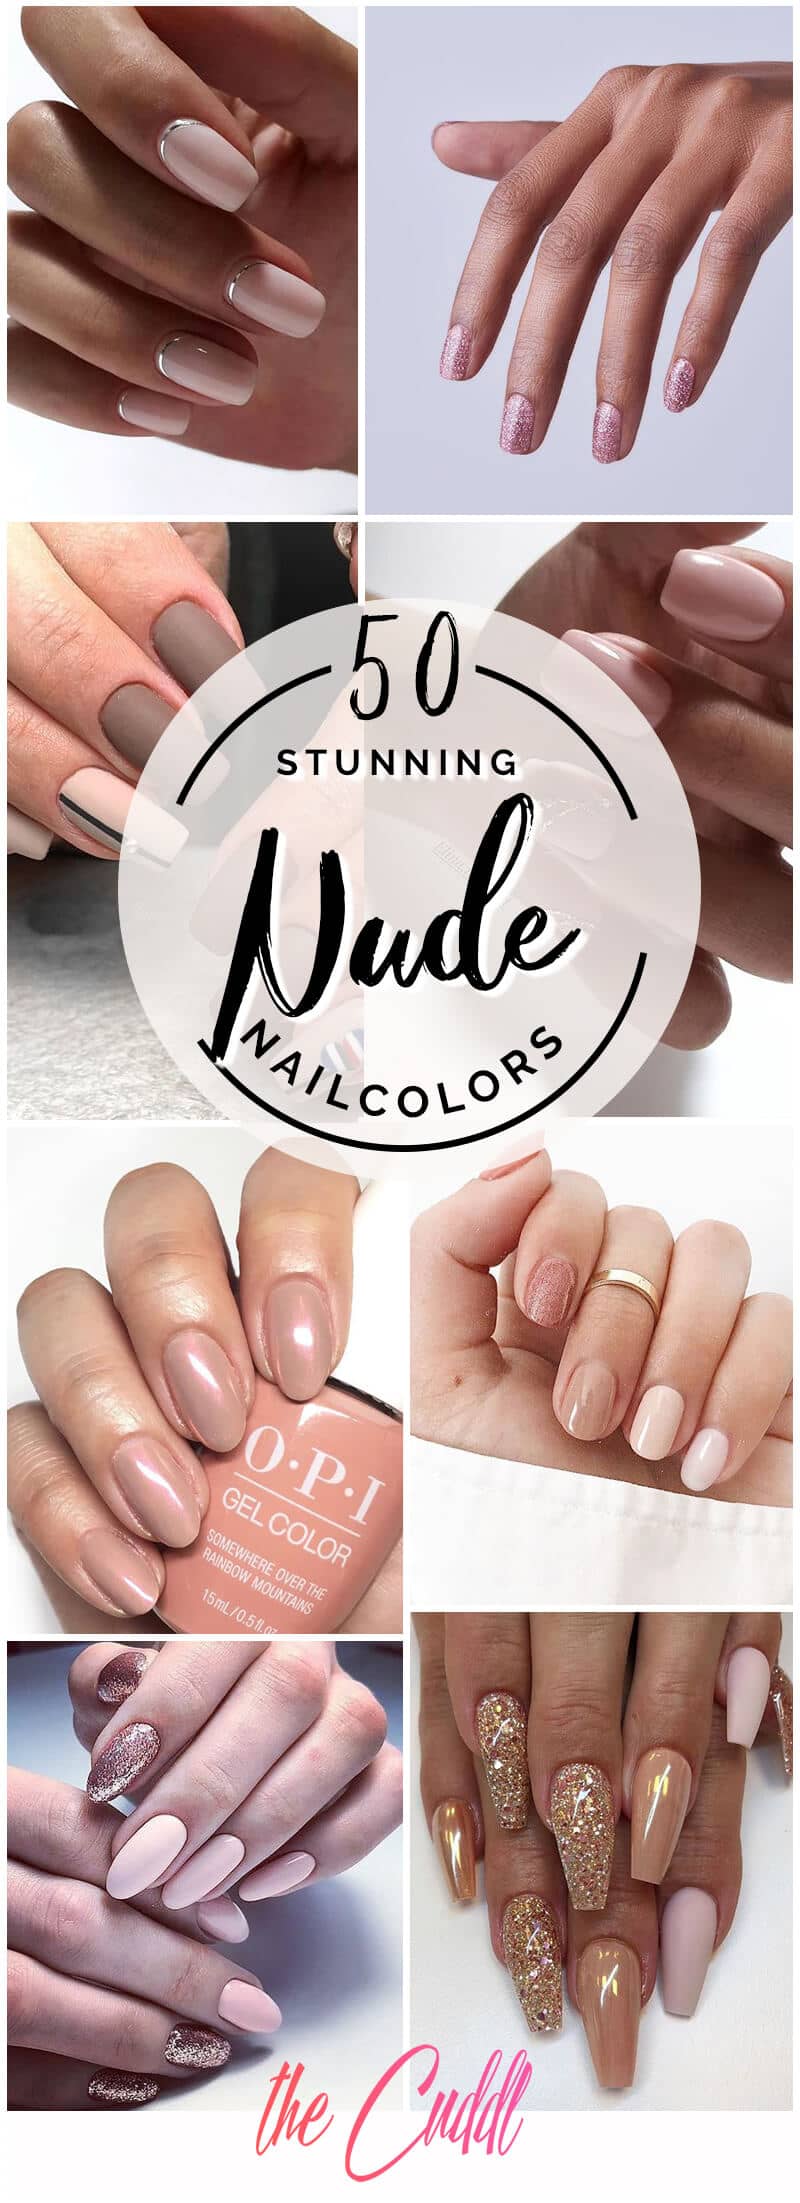 Nude Nail Art Ideas: 50 Creative Styles for Nude Nails You’ll Love